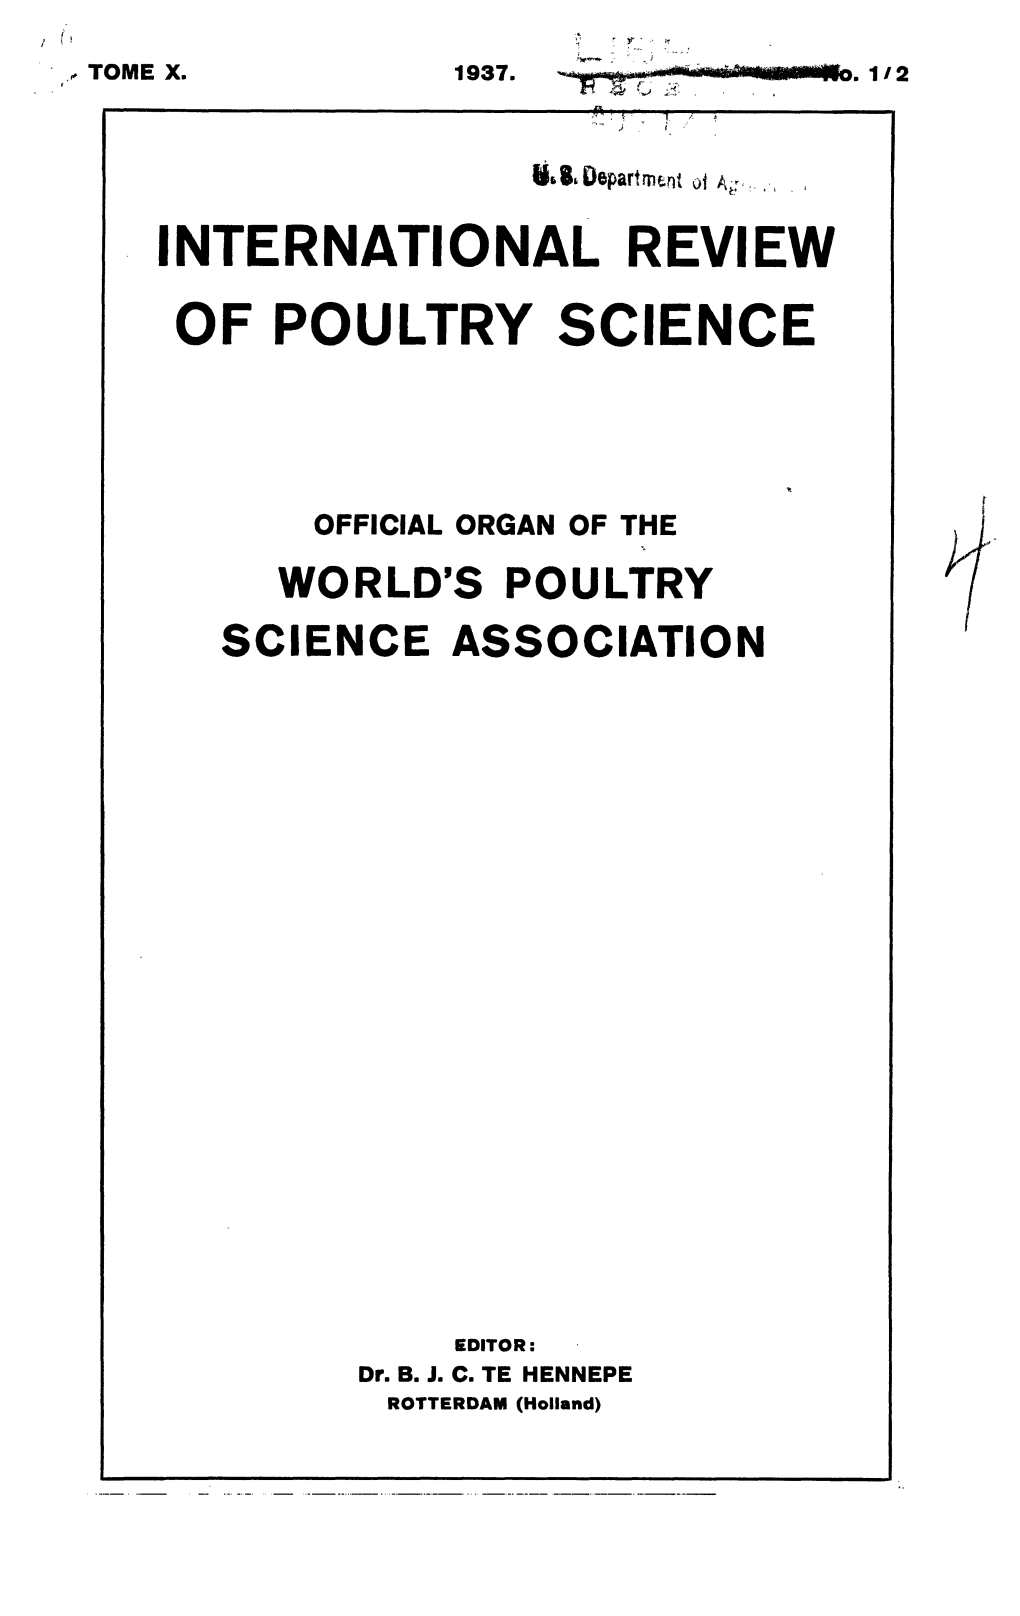 International Review of Poultry Science